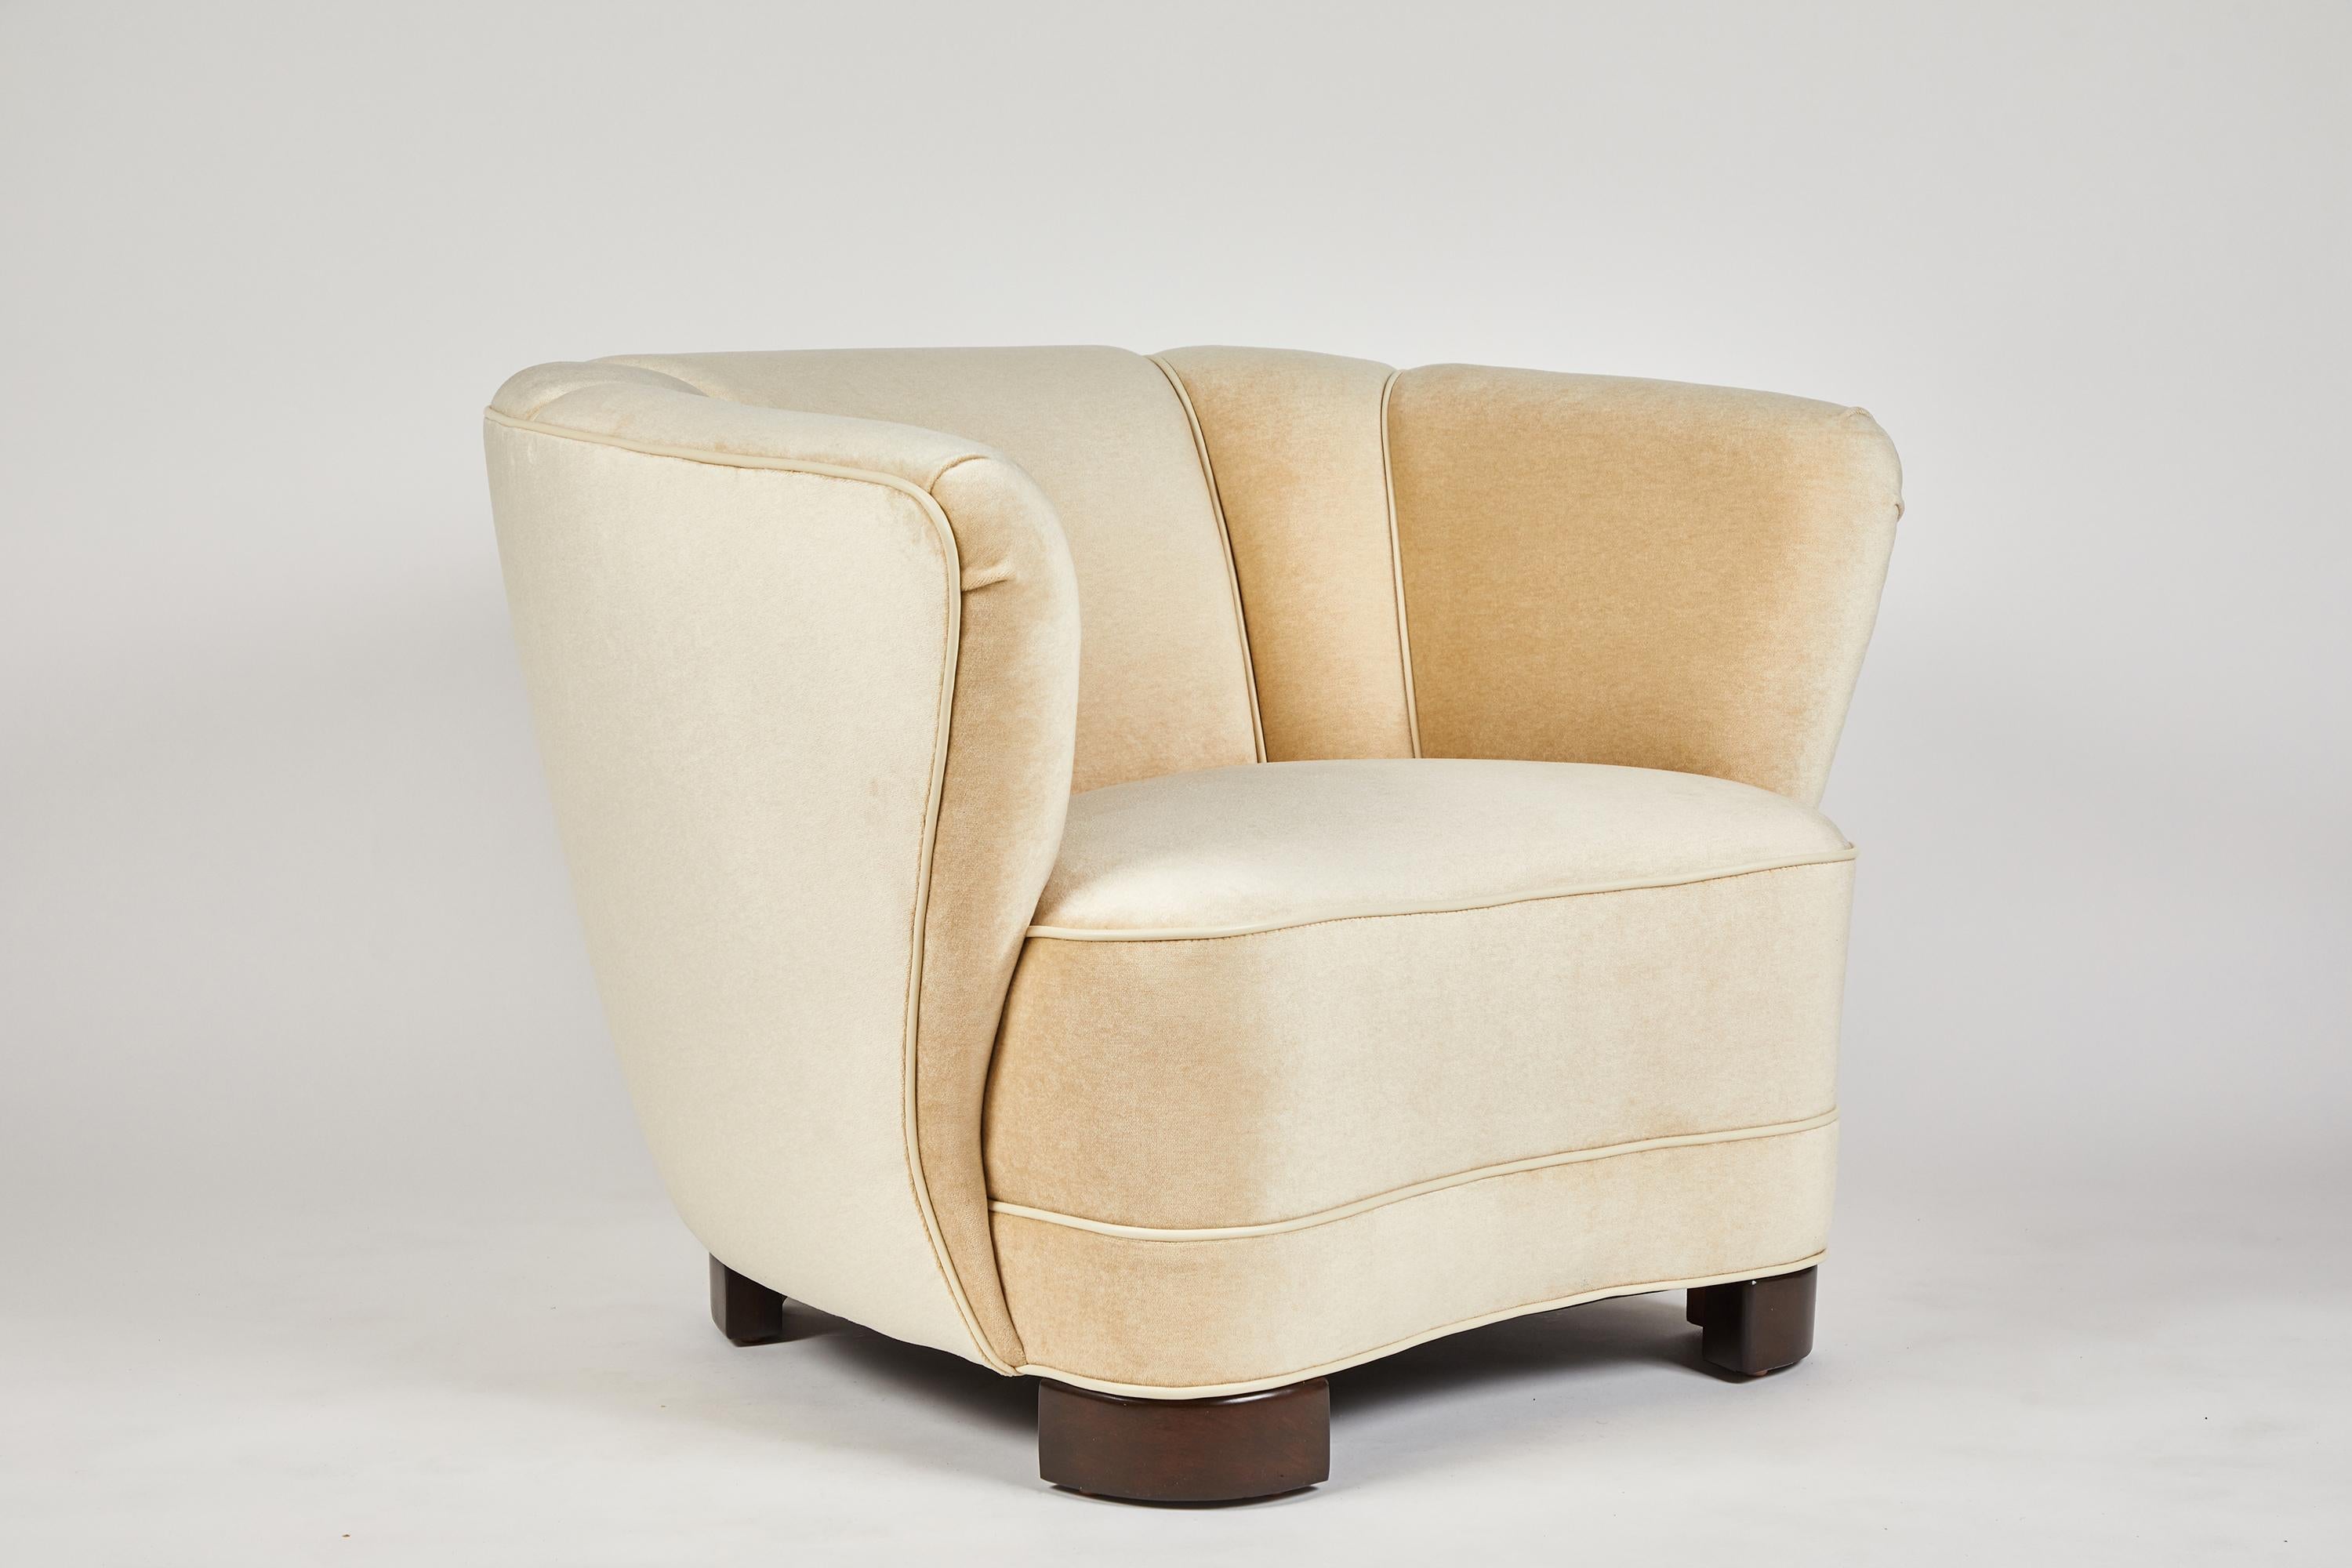 Sutton Place Club Chair by Dragonette Private Label 3